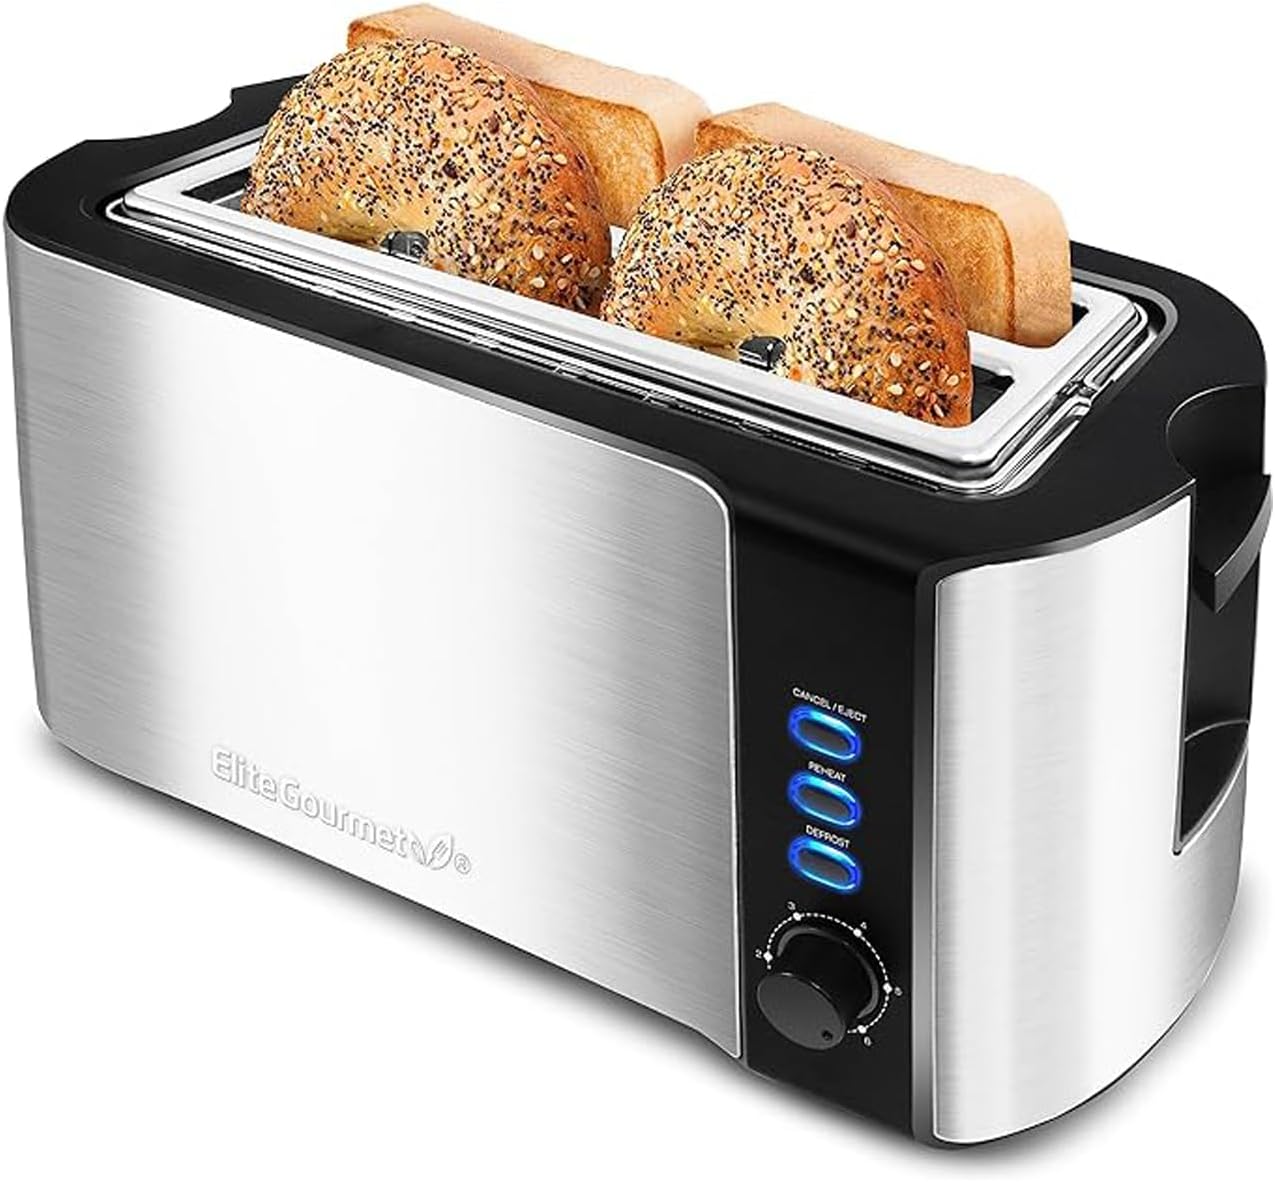 Elite Gourmet ECT-3100# Long Slot 4 Slice Toaster, Reheat, 6 Toast Settings, Defrost, Cancel Functions, Built-in Warming Rack, Extra Wide Slots for Bagels Waffles, Stainless Steel & Black